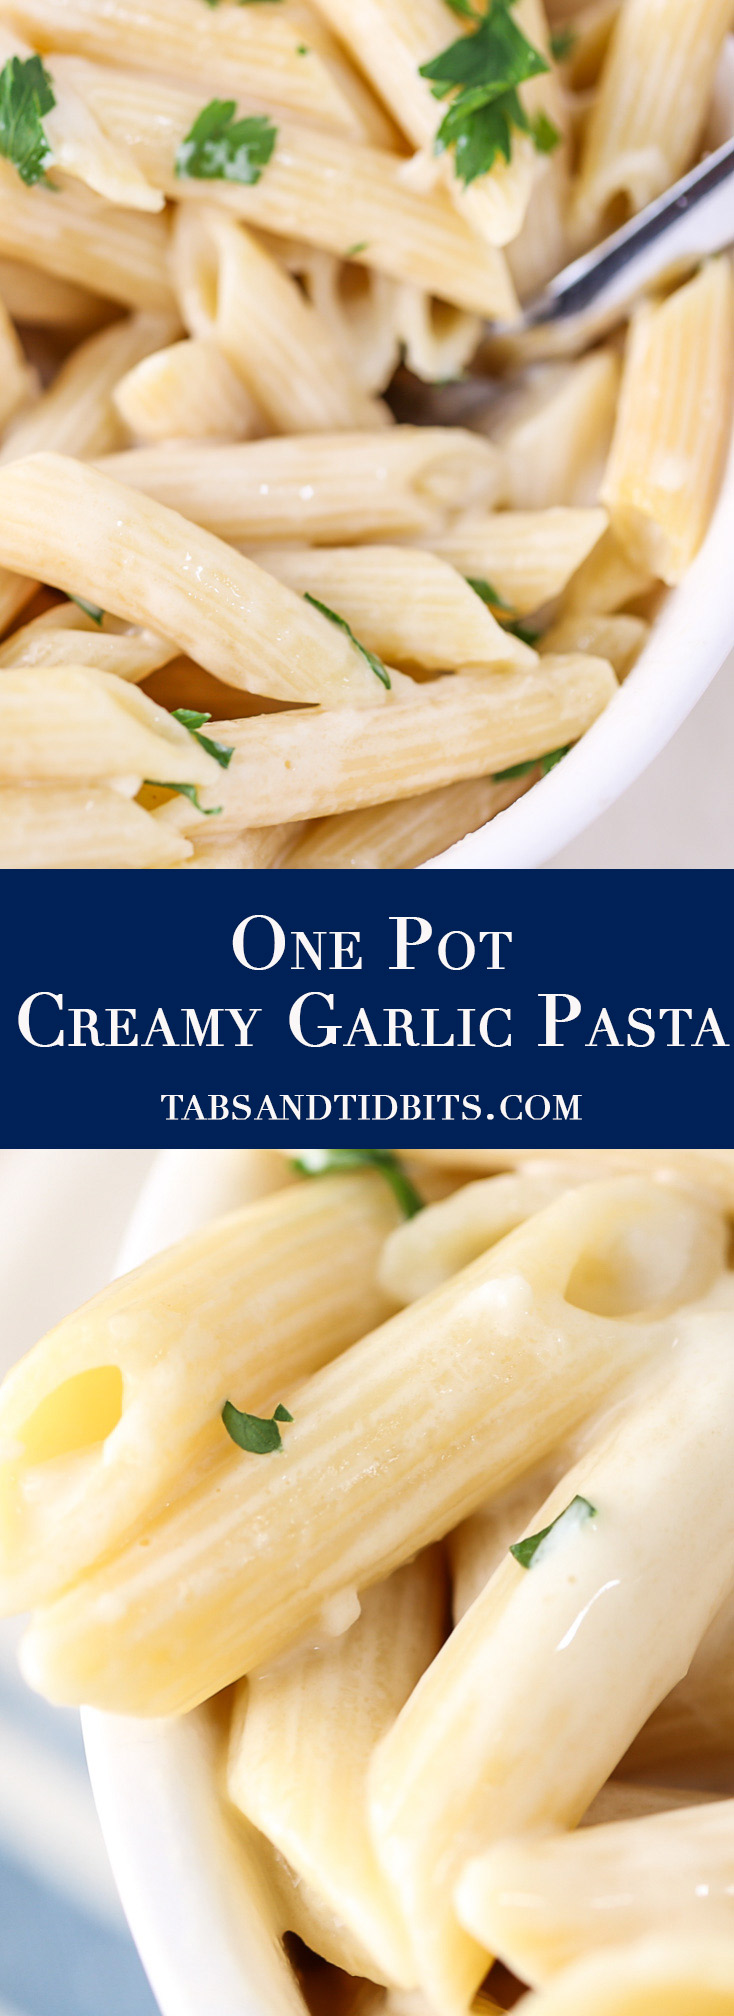 One Pot Creamy Garlic Pasta - This dish is fast, flavorful, and full of creamy garlic goodness!